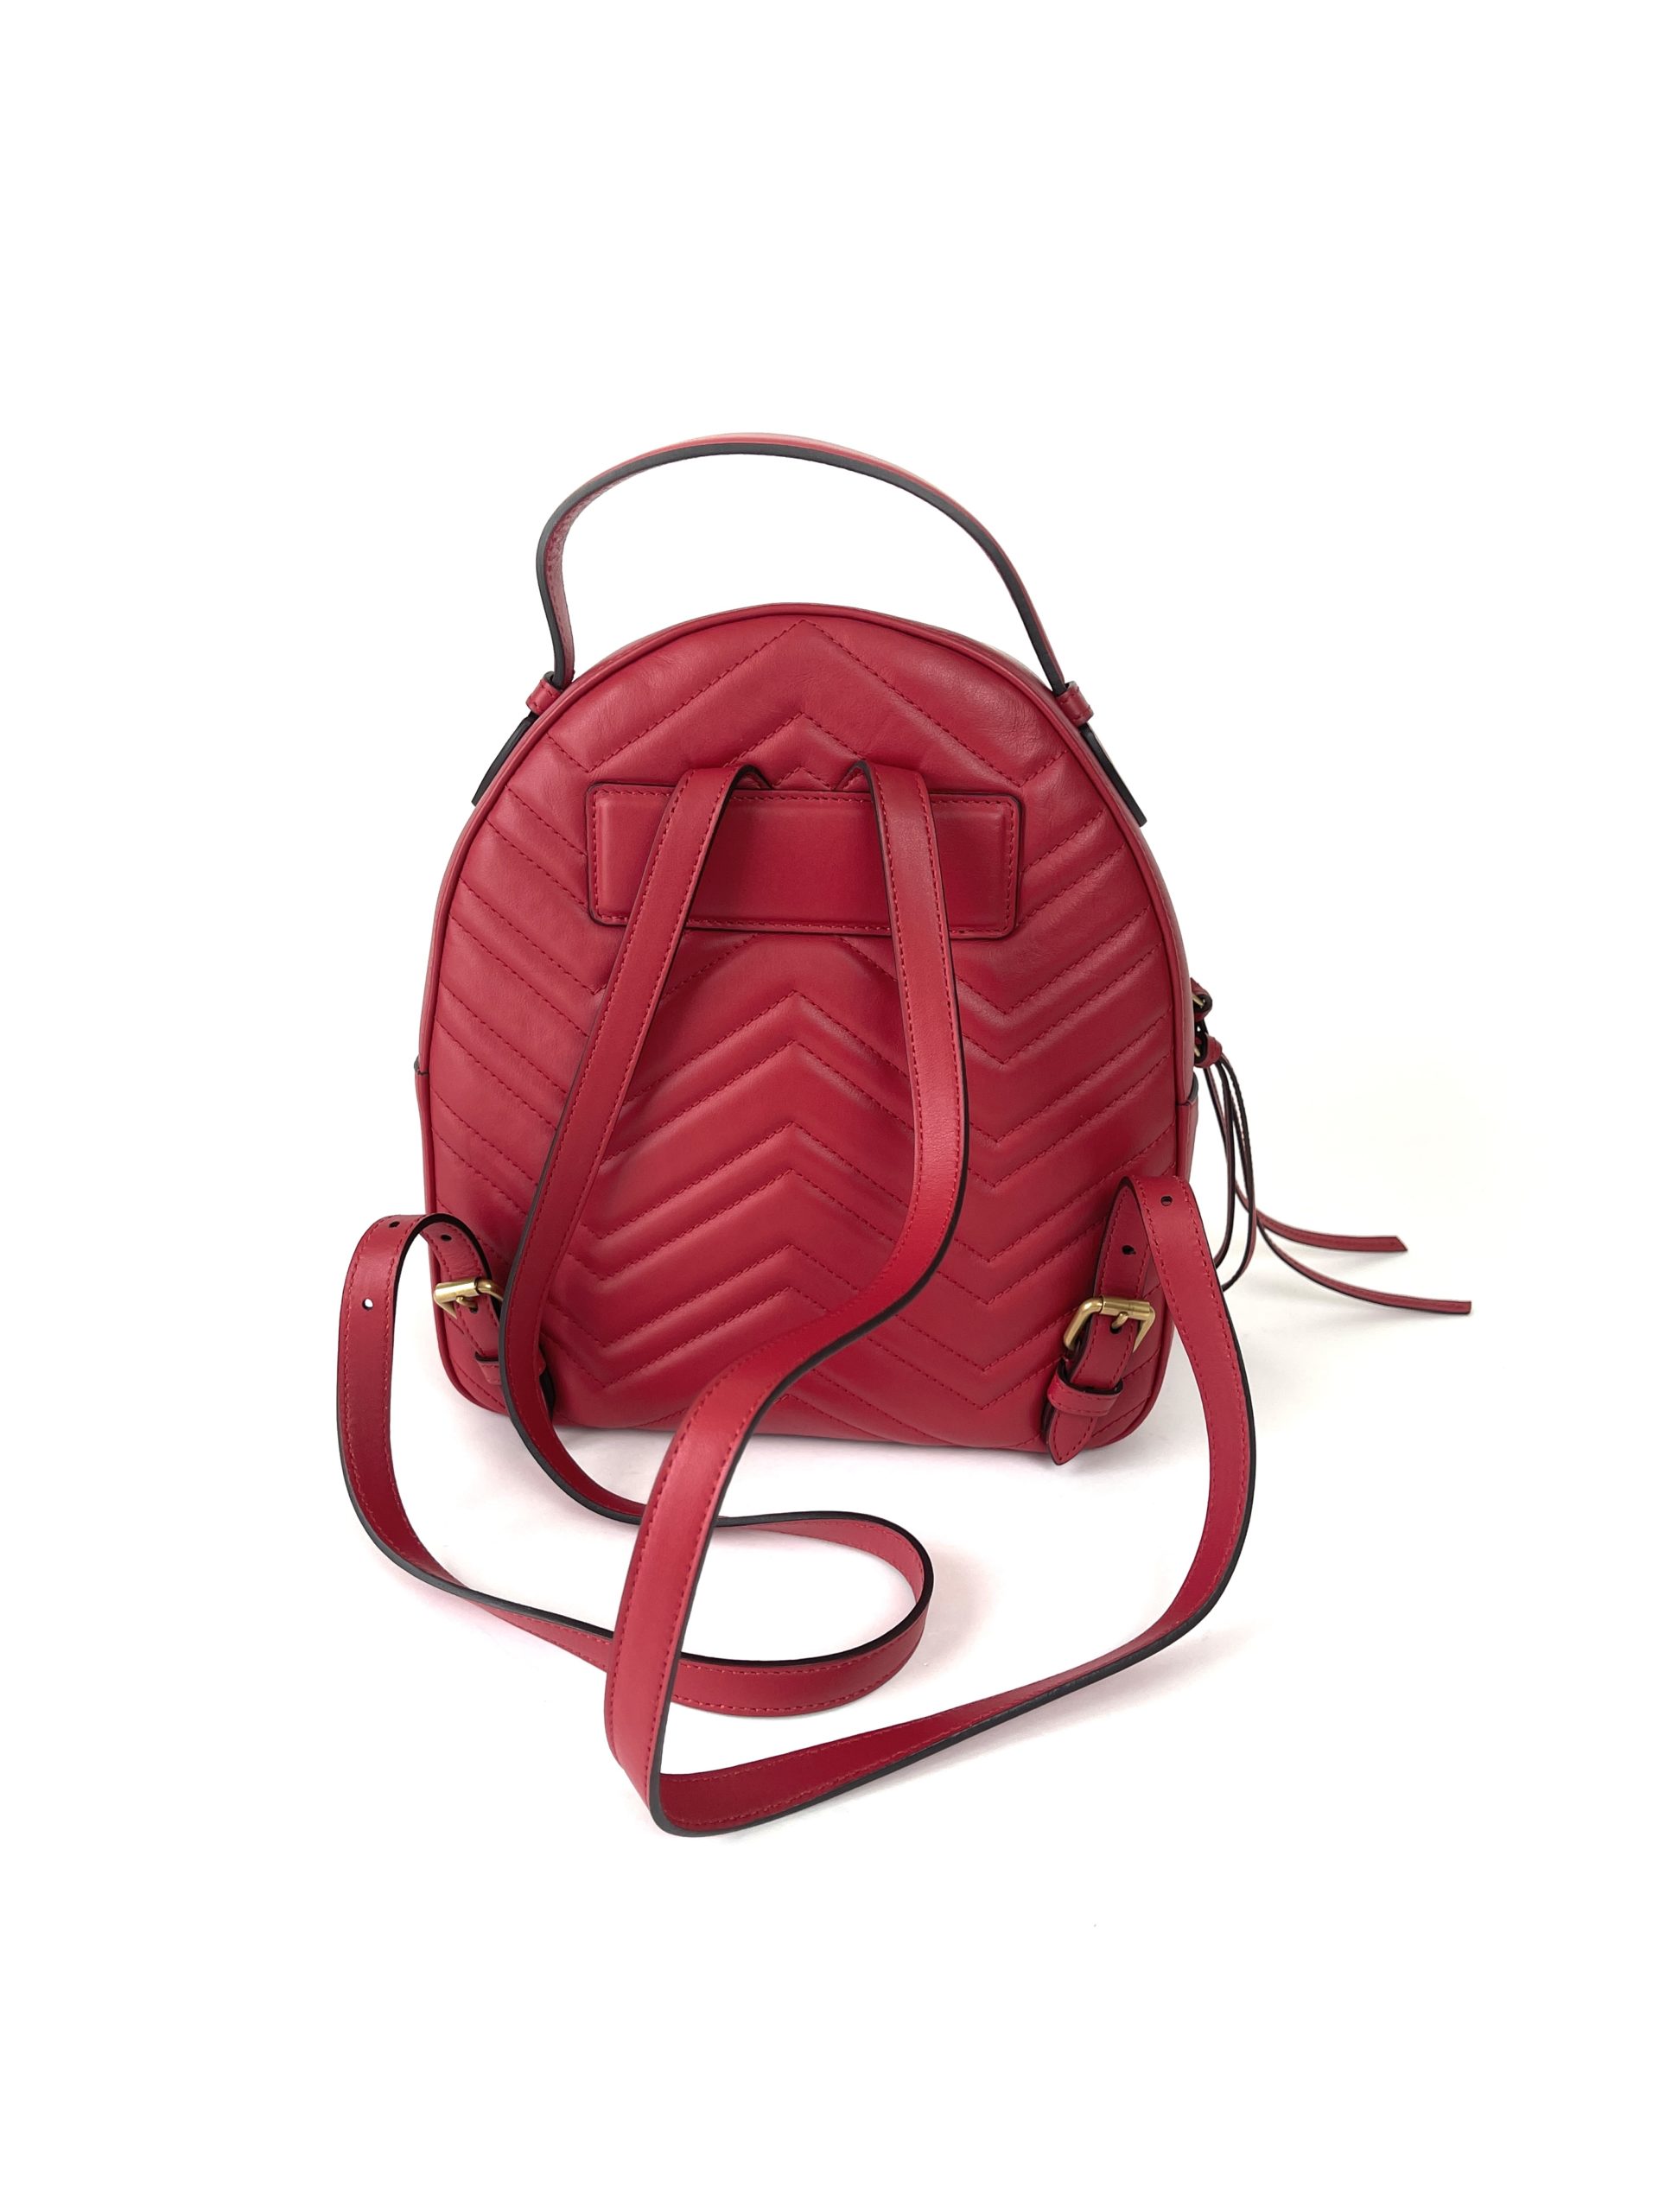 Gucci - Marmont Backpack - Red Calfskin Matelassé Leather - AGHW